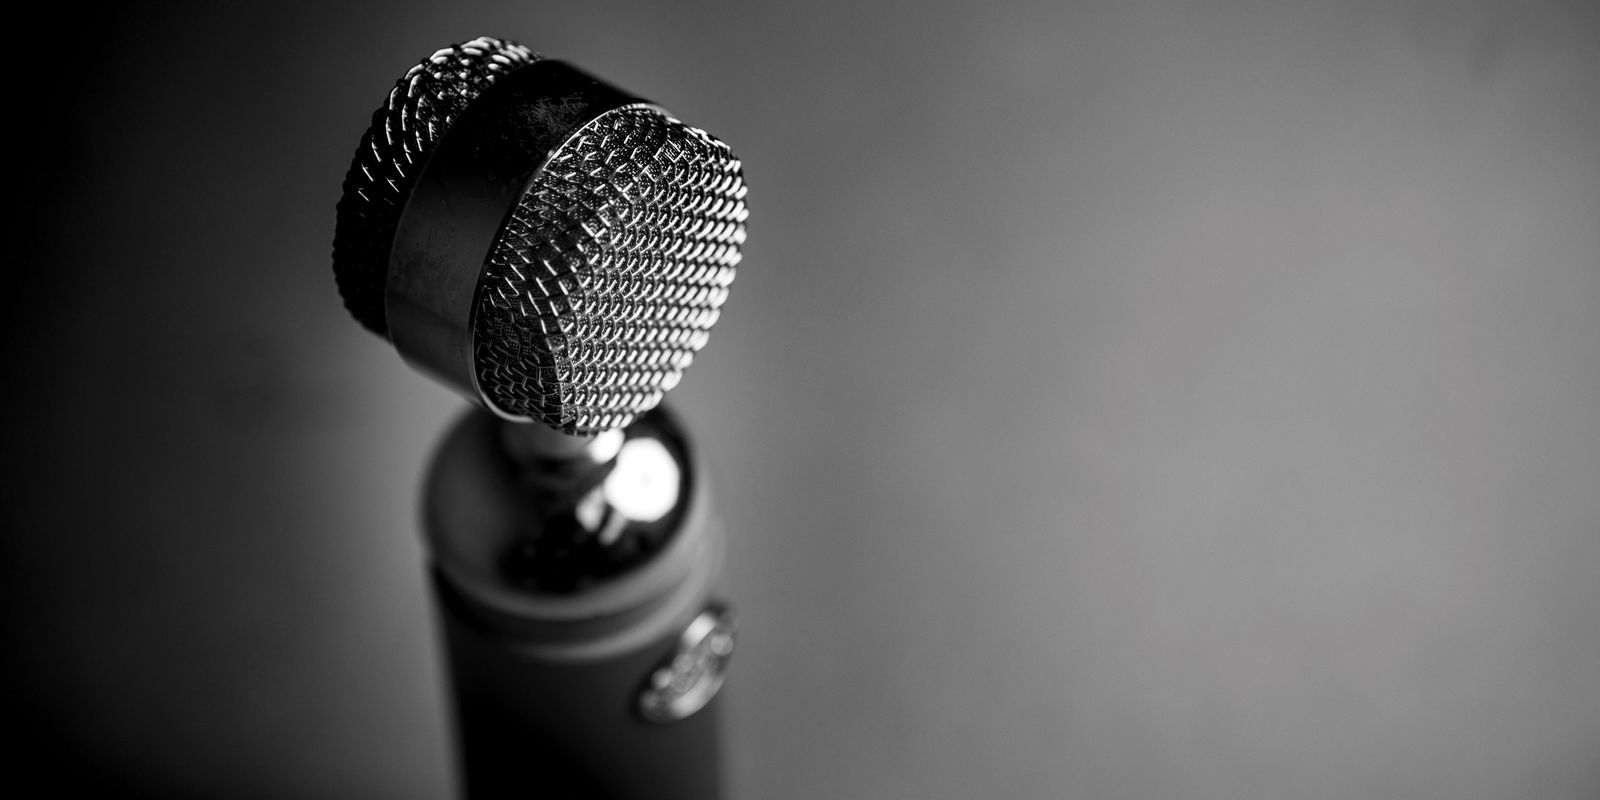 Photograph of a mic